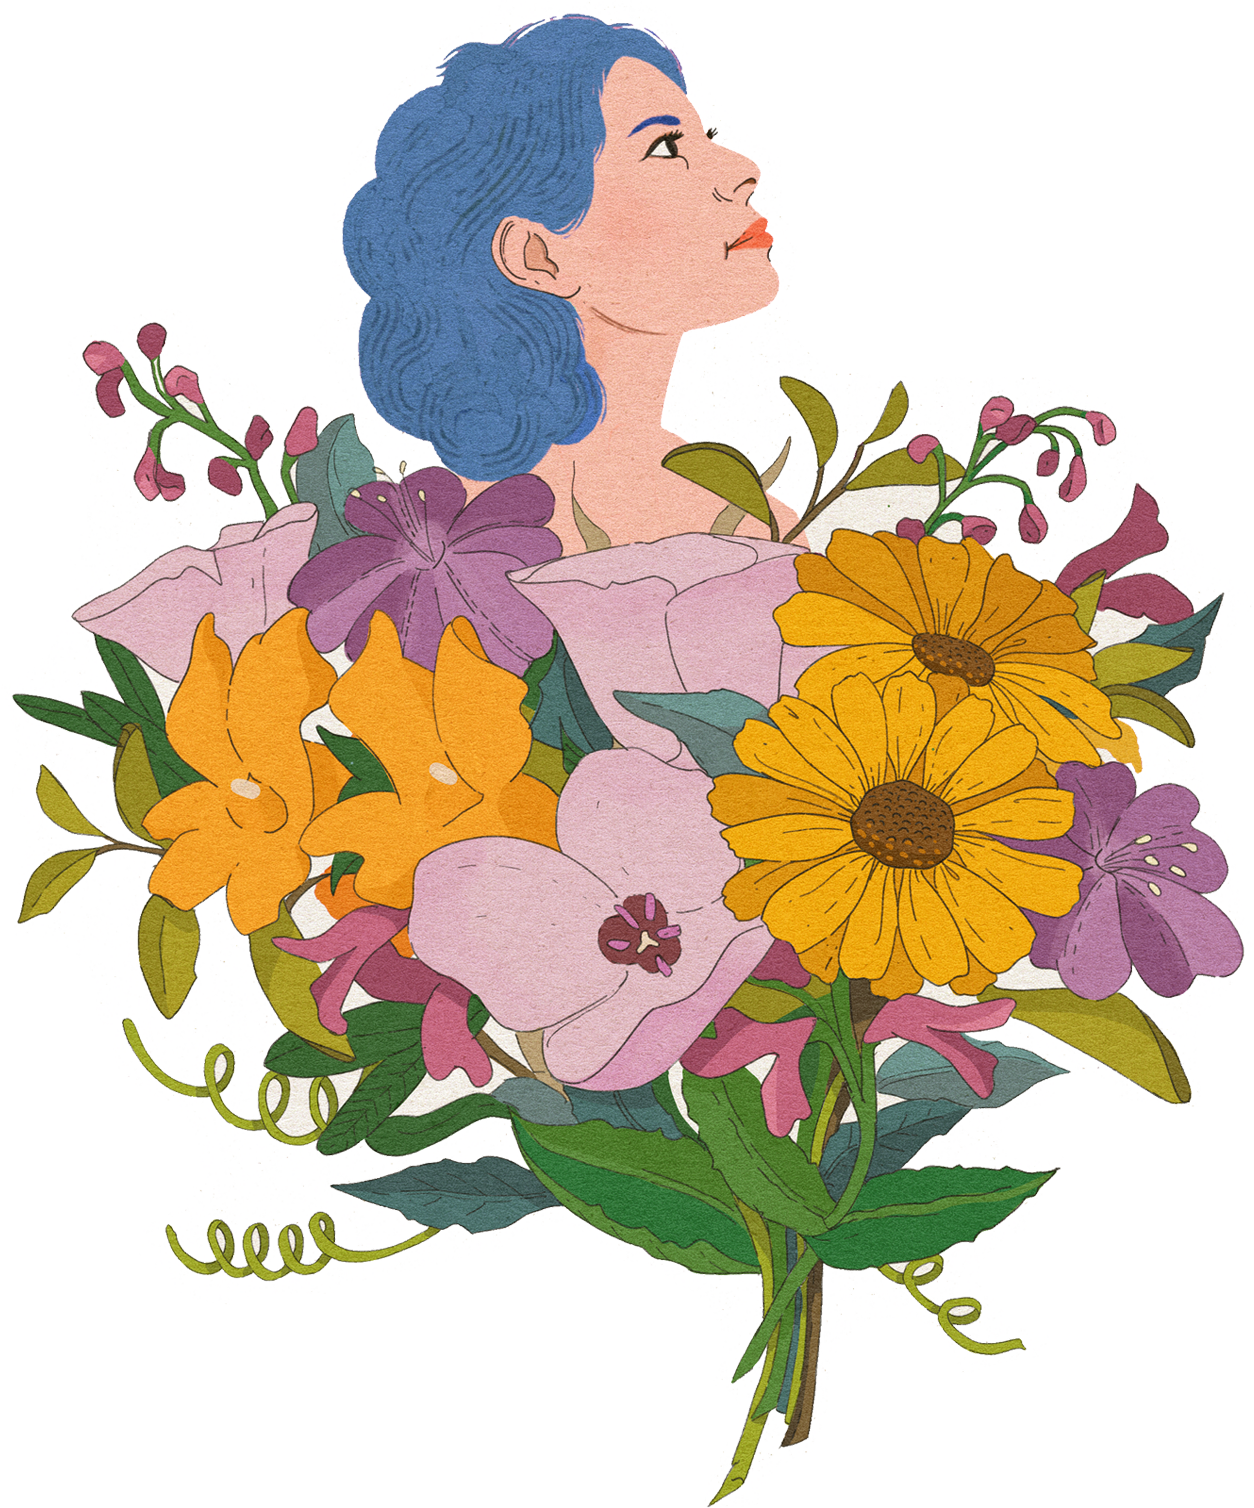 illustration of lesley goren with california wildflowers